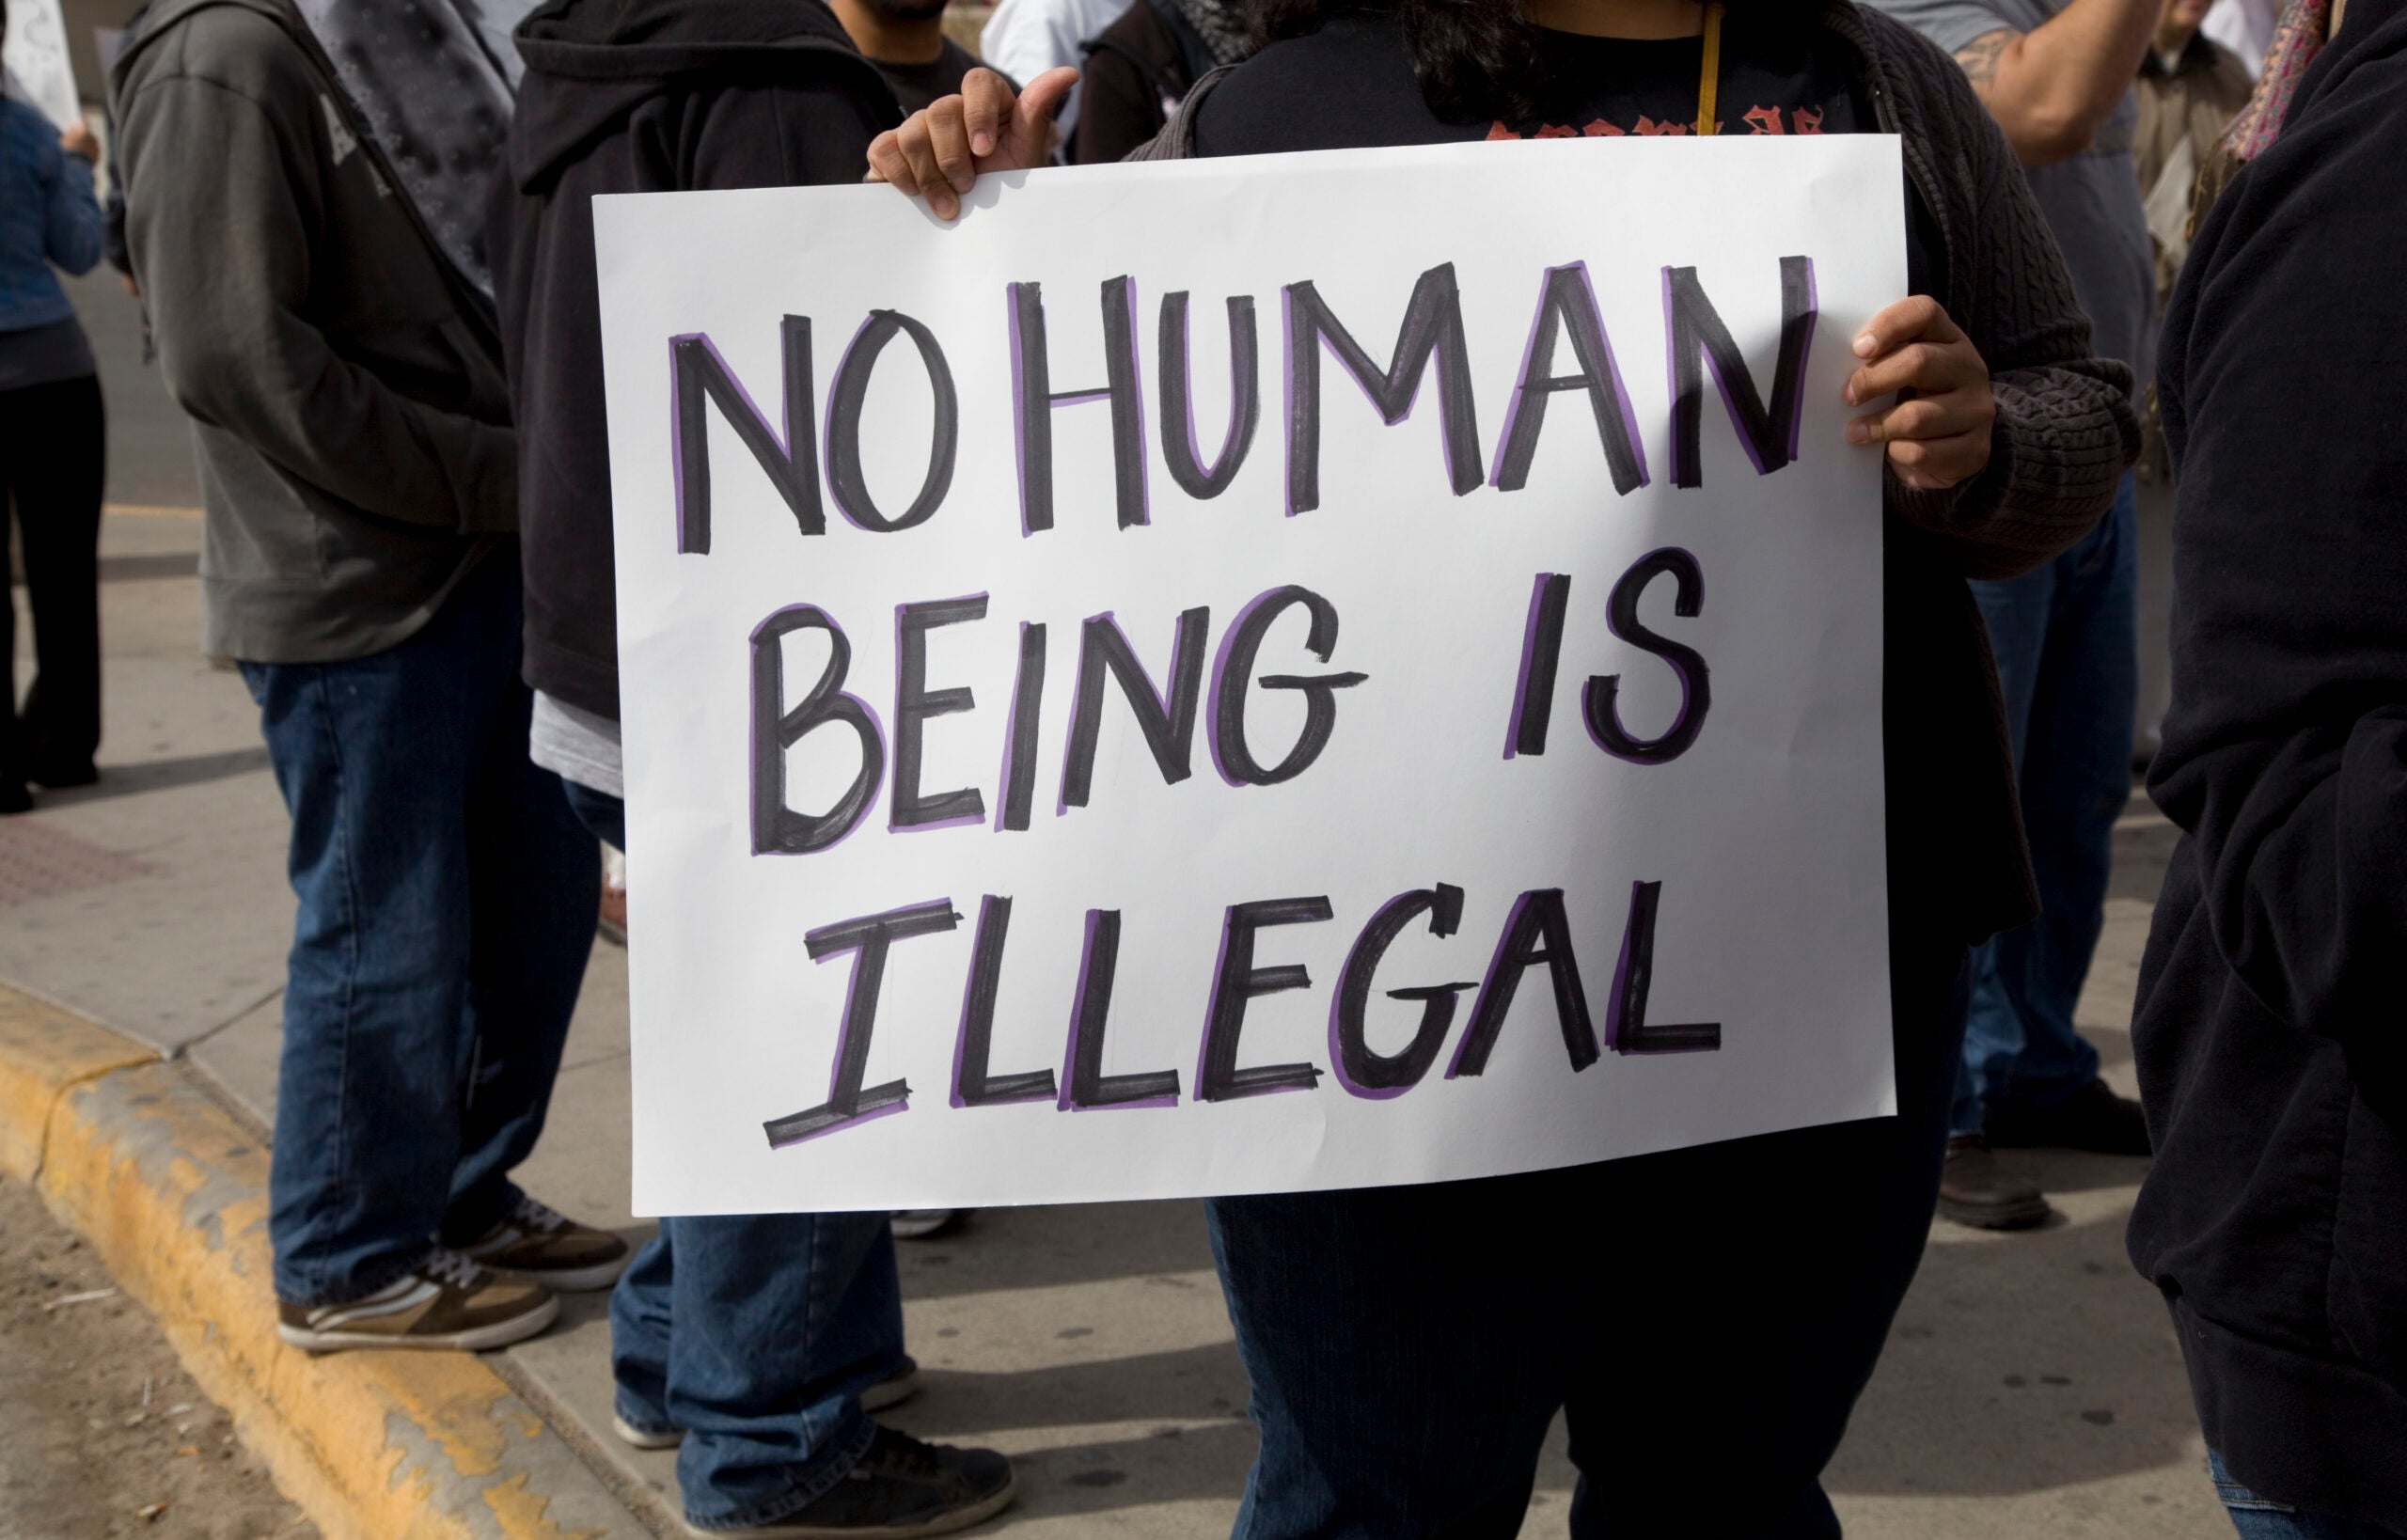 Protest sign from an Immigration Policy rally. Sign reads "No Human Being is Illegal"